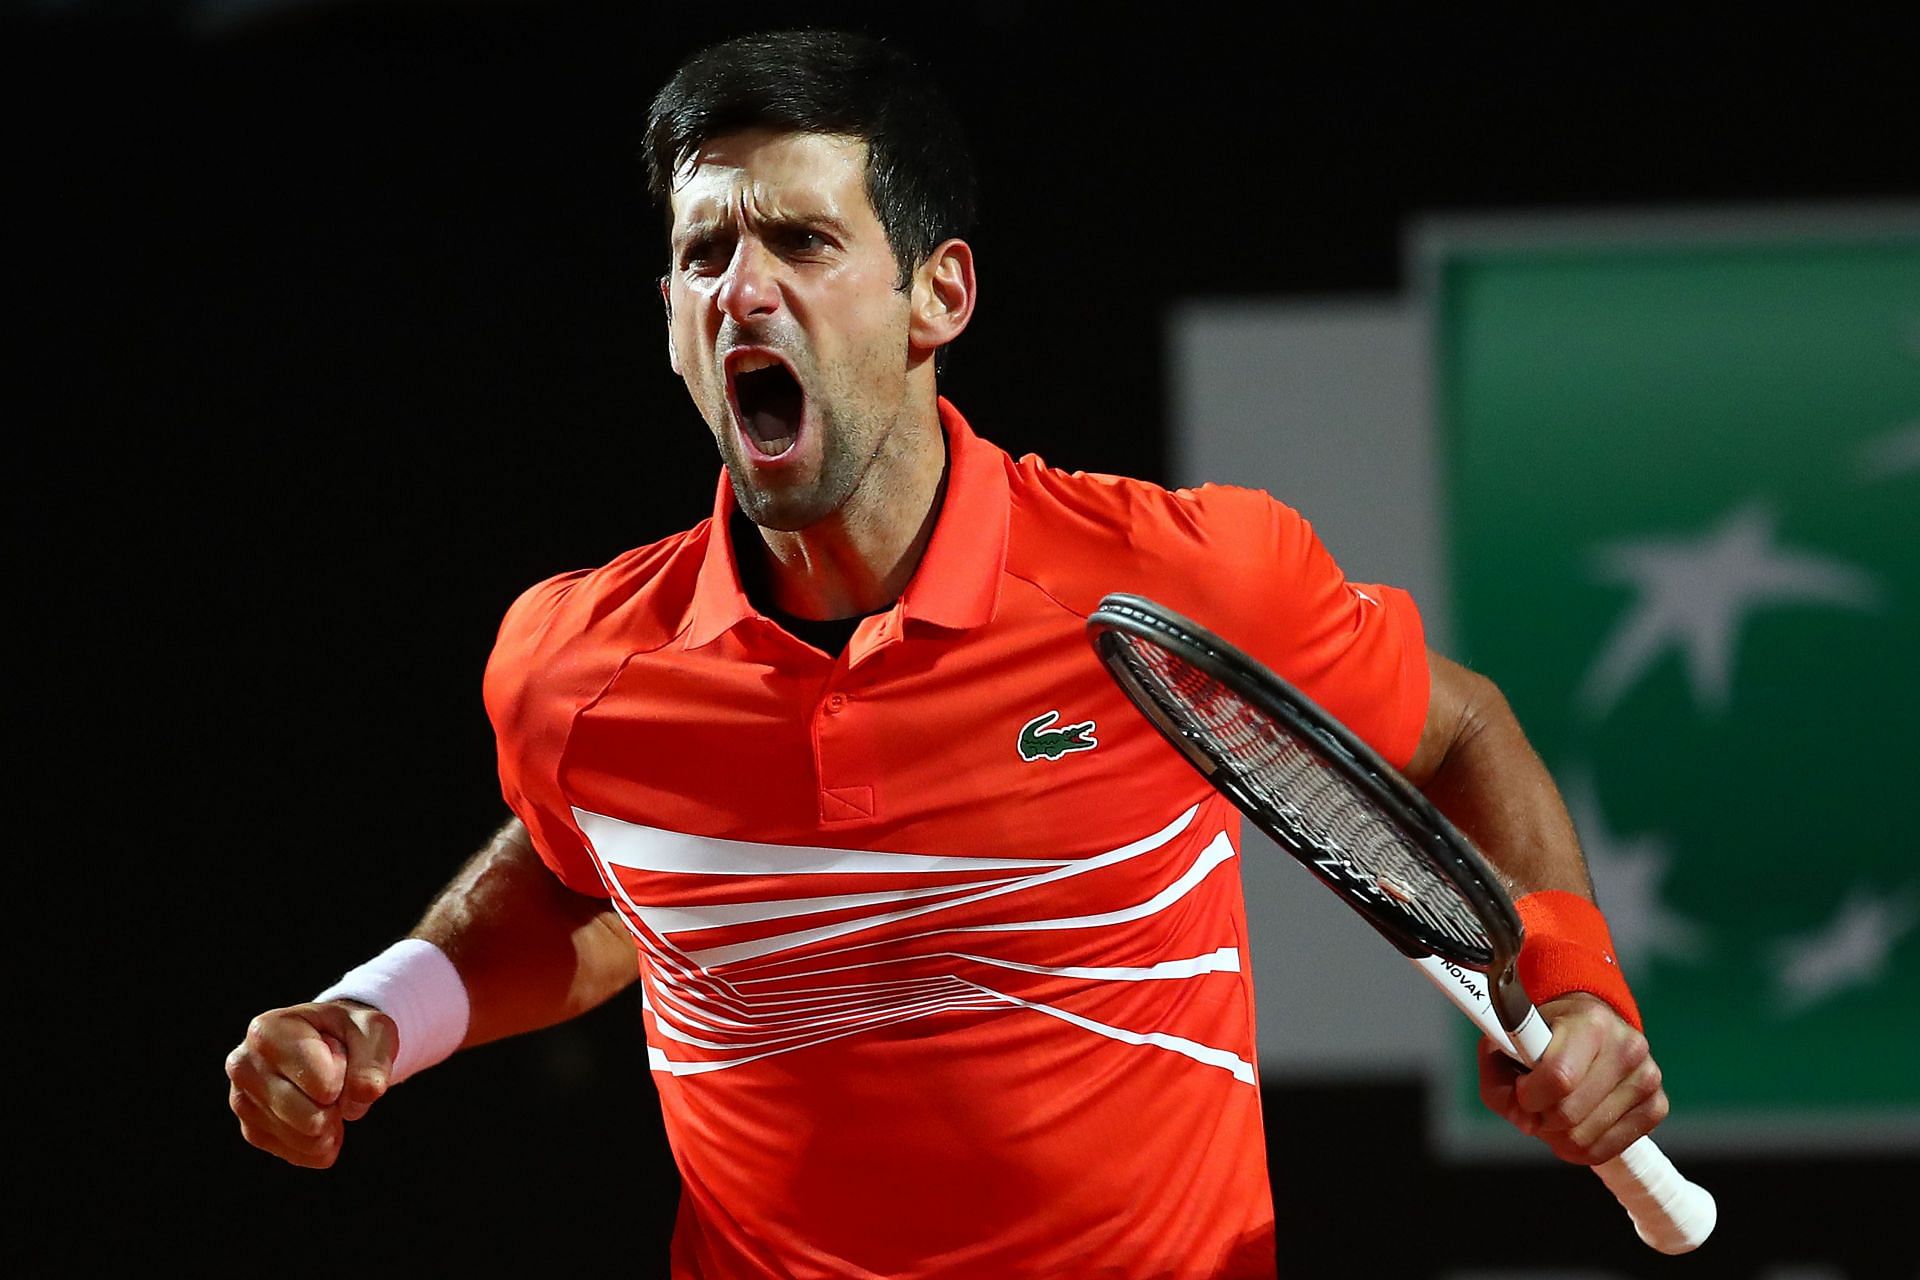 Djokovic will play next at the Davis Cup and the Laver Cup